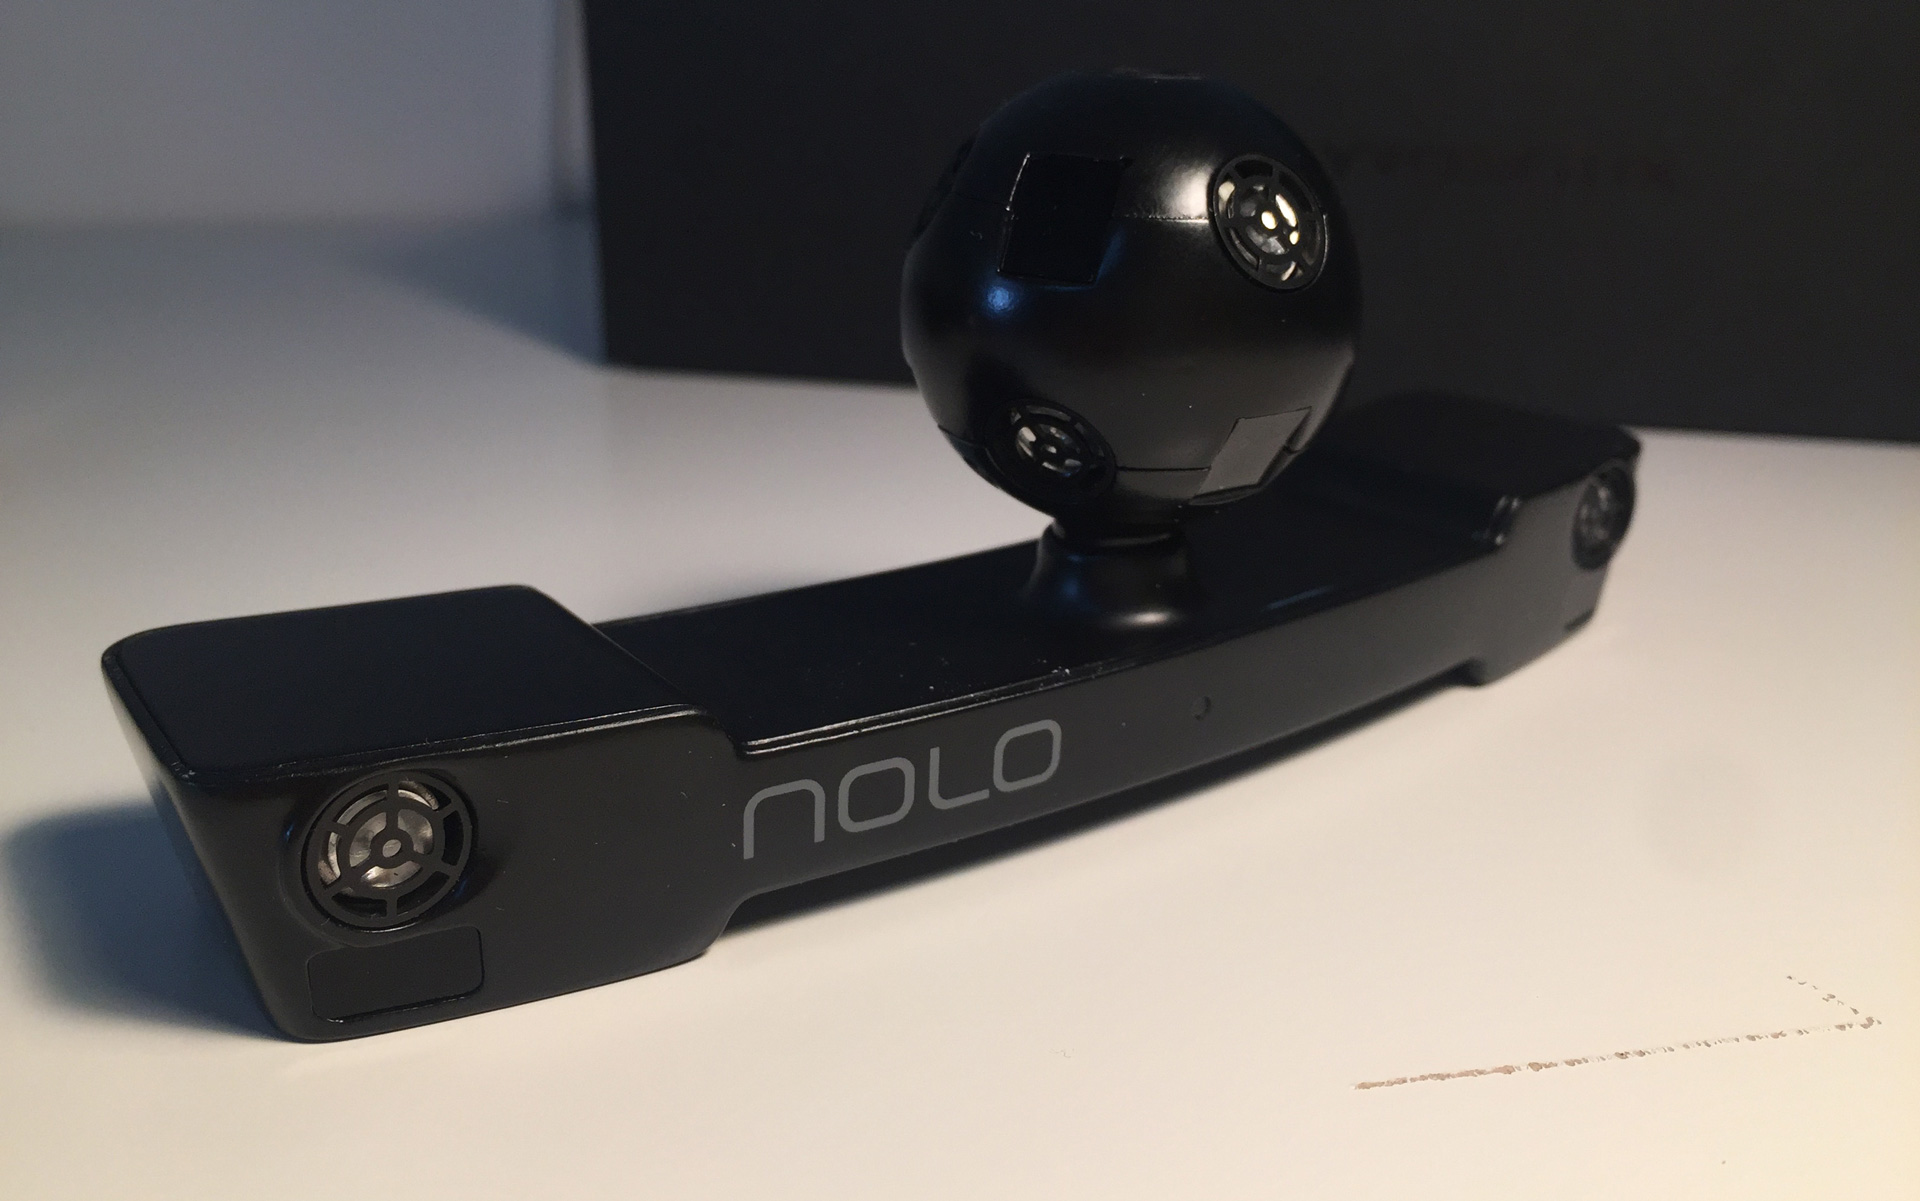 NOLO VR Promises $99 Positional Tracking and SteamVR Gaming on Any